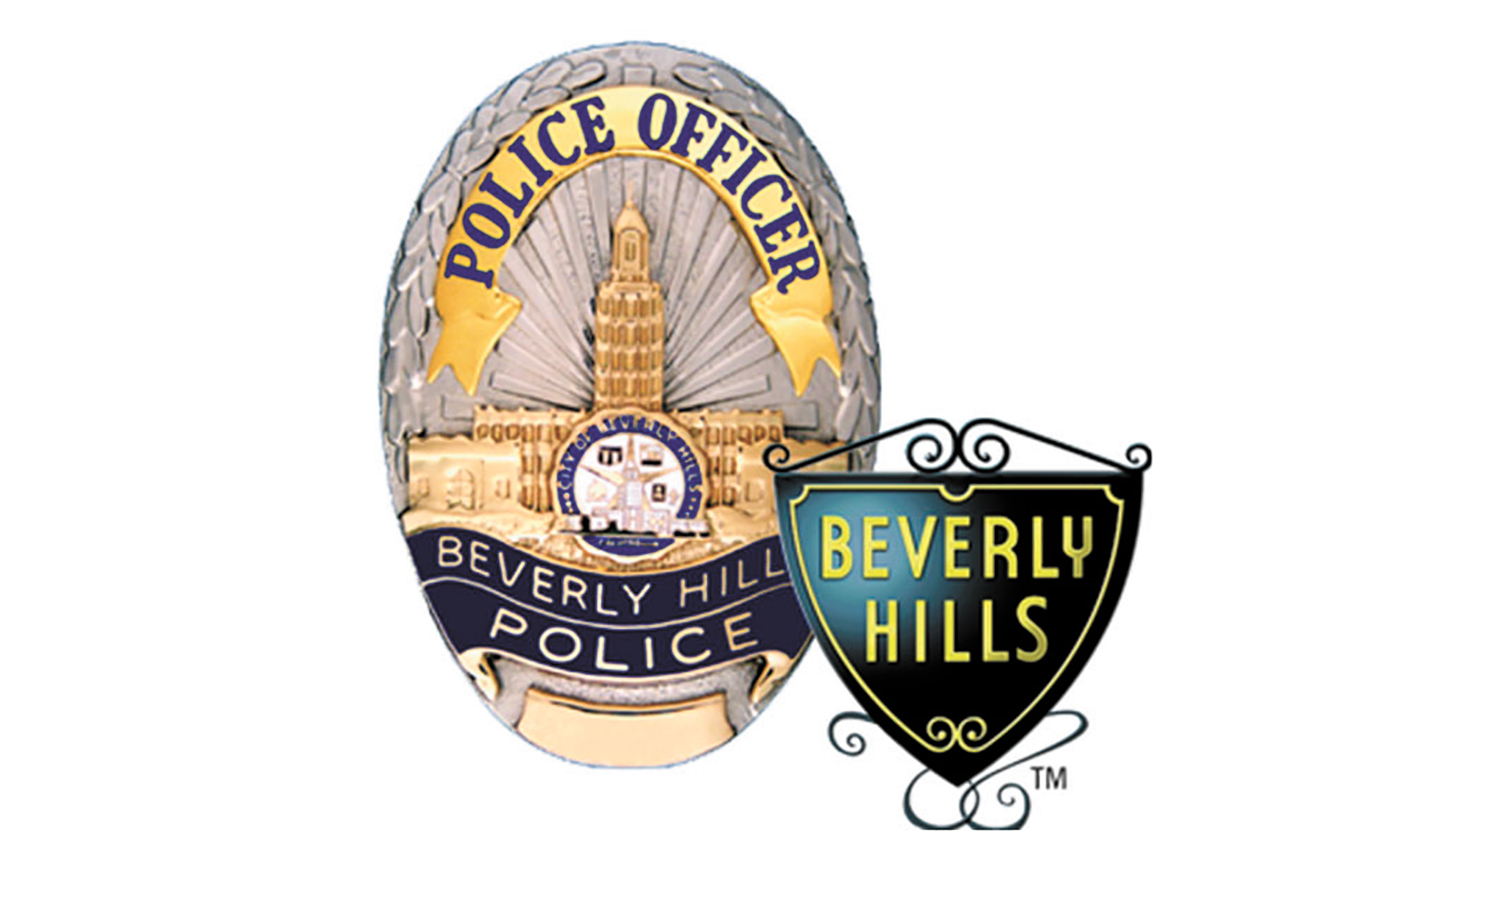 BHPD To Relax Enforcement Over New Year’s Holiday